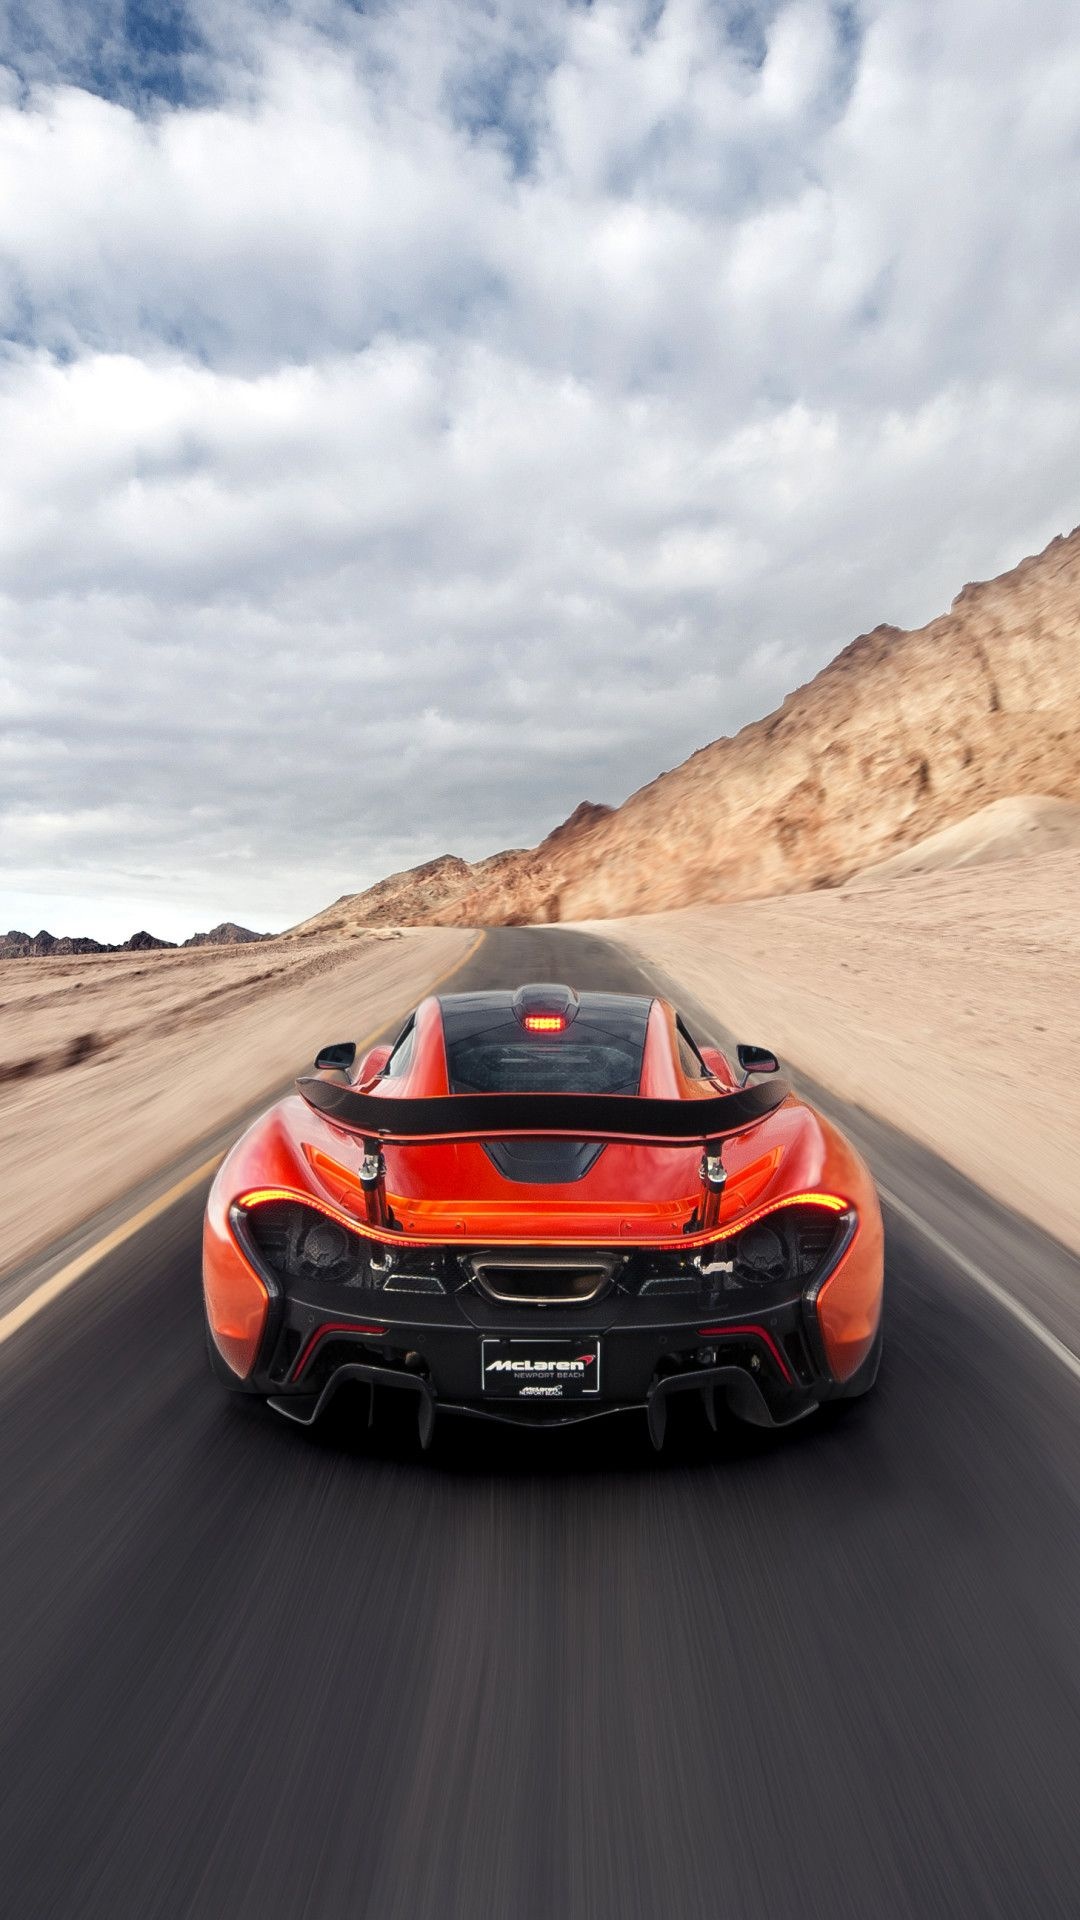 Mclaren P1, Unmatched performance, Iconic supercar, Bugatti Veyron rival, 1080x1920 Full HD Phone